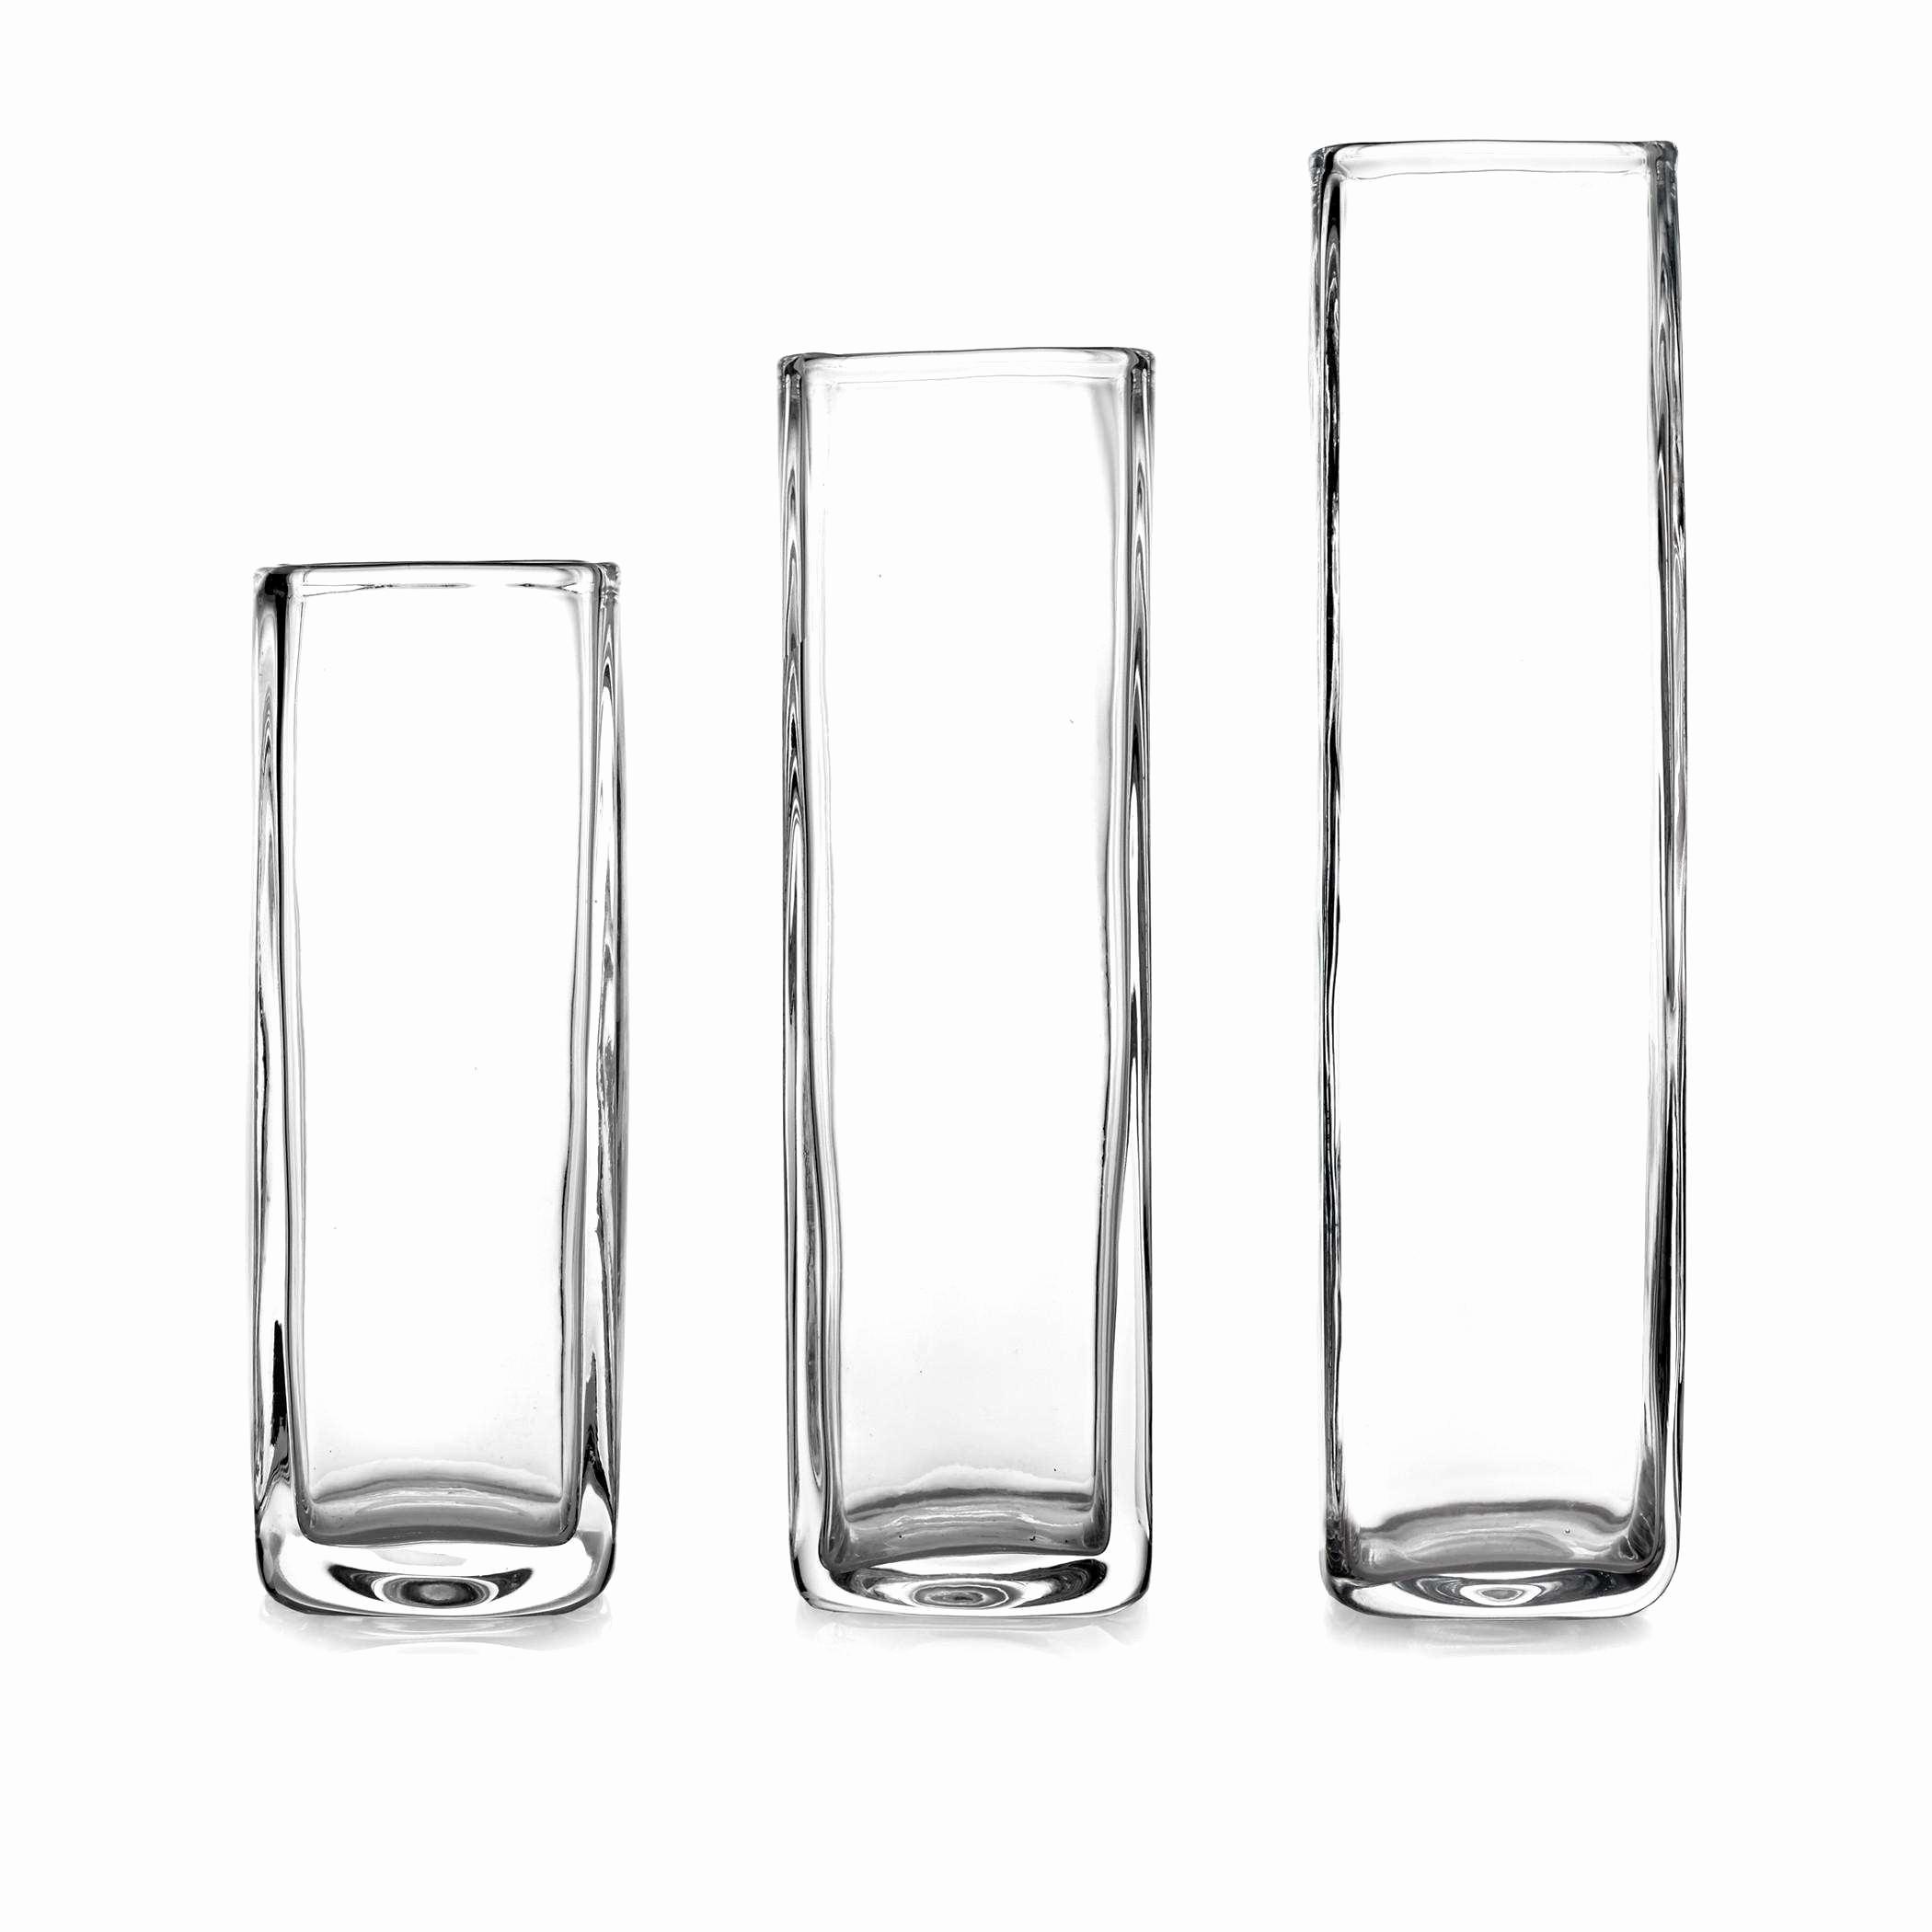 19 Nice Tall Glass Wedding Vases 2024 free download tall glass wedding vases of glass vases for wedding new glass vases cheap glass flower vases new inside glass vases for wedding awesome glass wedding centerpieces inspirational living room t